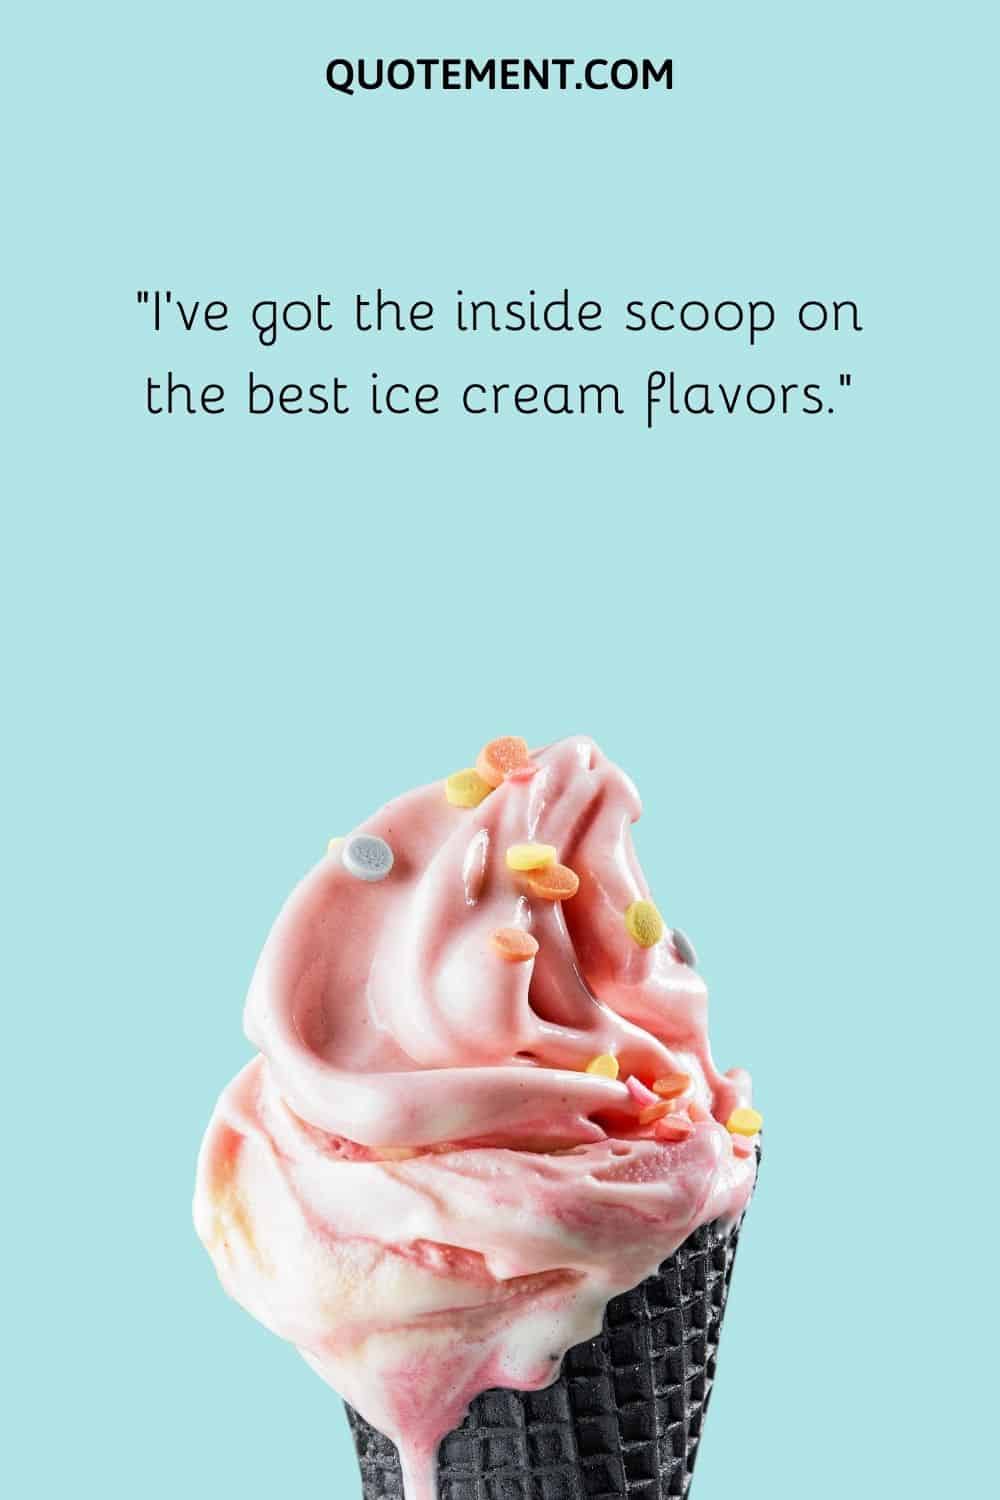 I’ve got the inside scoop on the best ice cream flavors